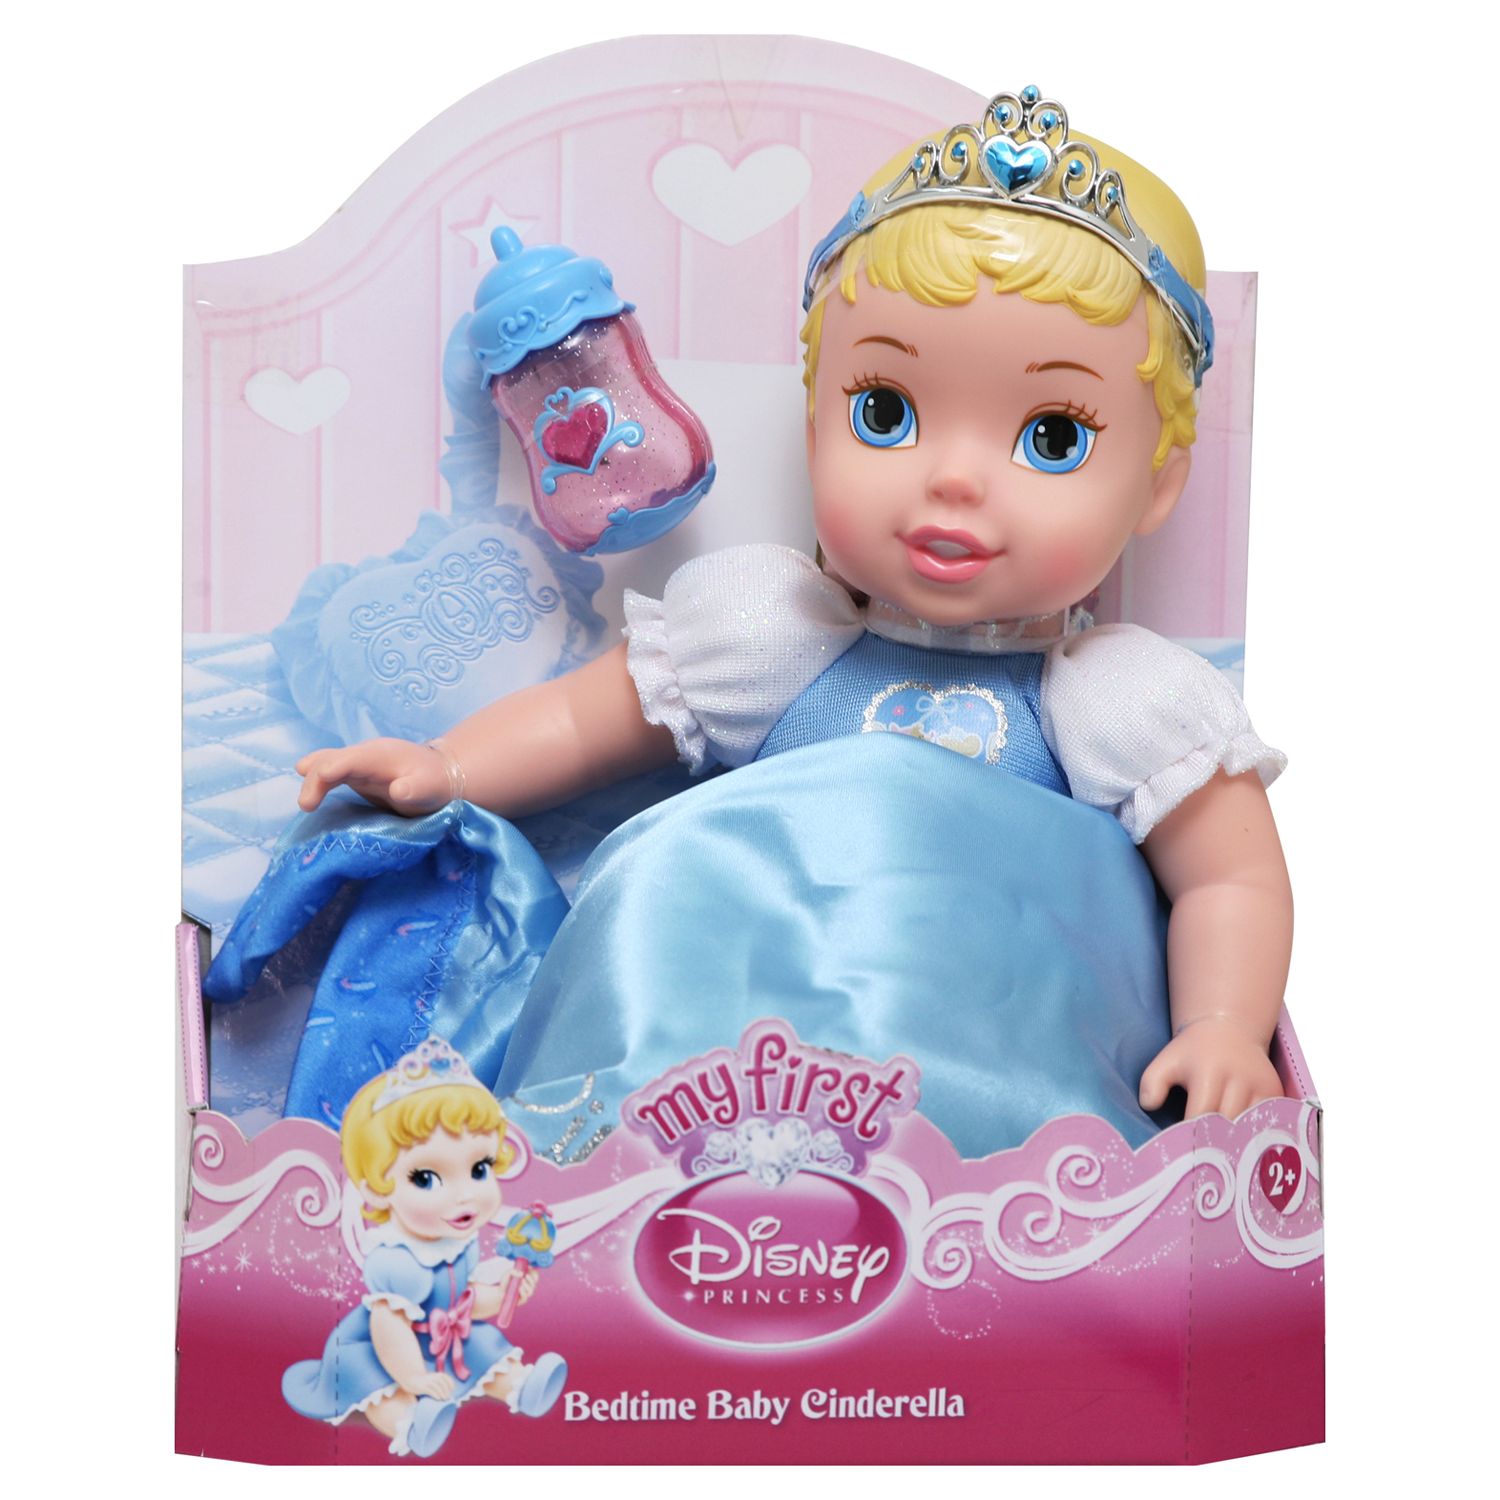 my first princess baby doll